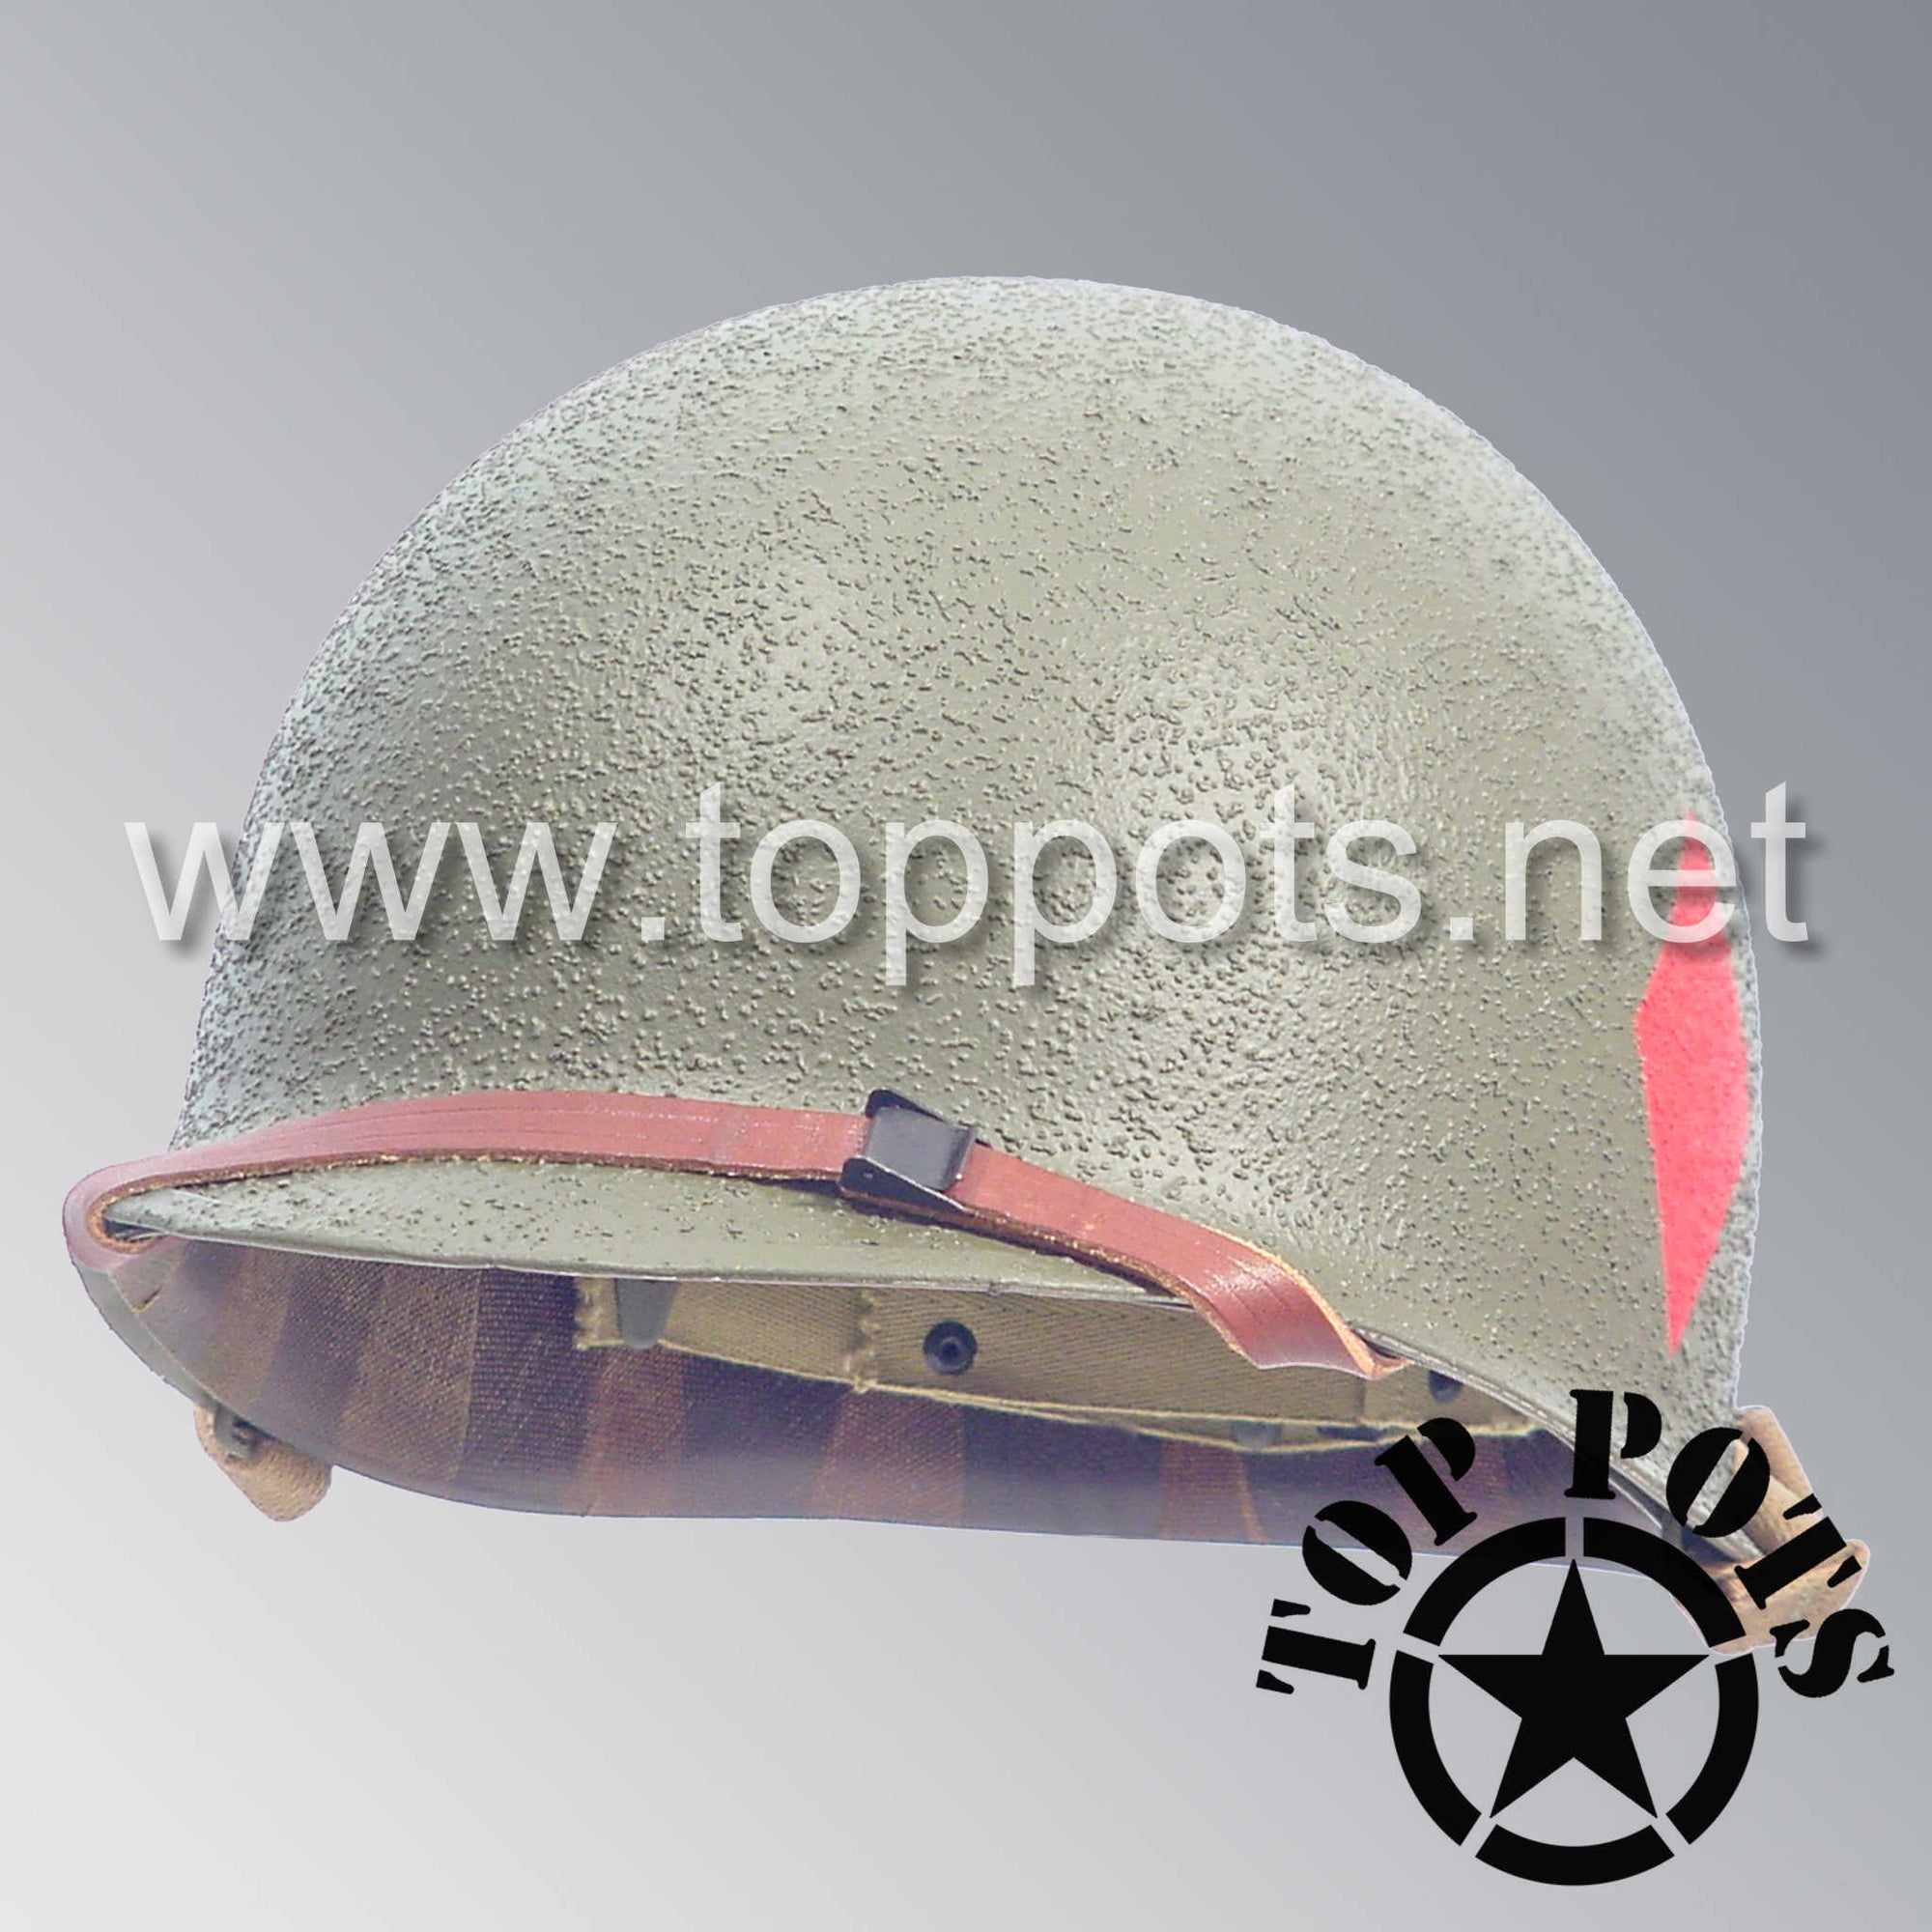 WWII US Army Restored Original M1 Infantry Helmet Swivel Bale Shell and Liner with 5th Infantry Division Emblem